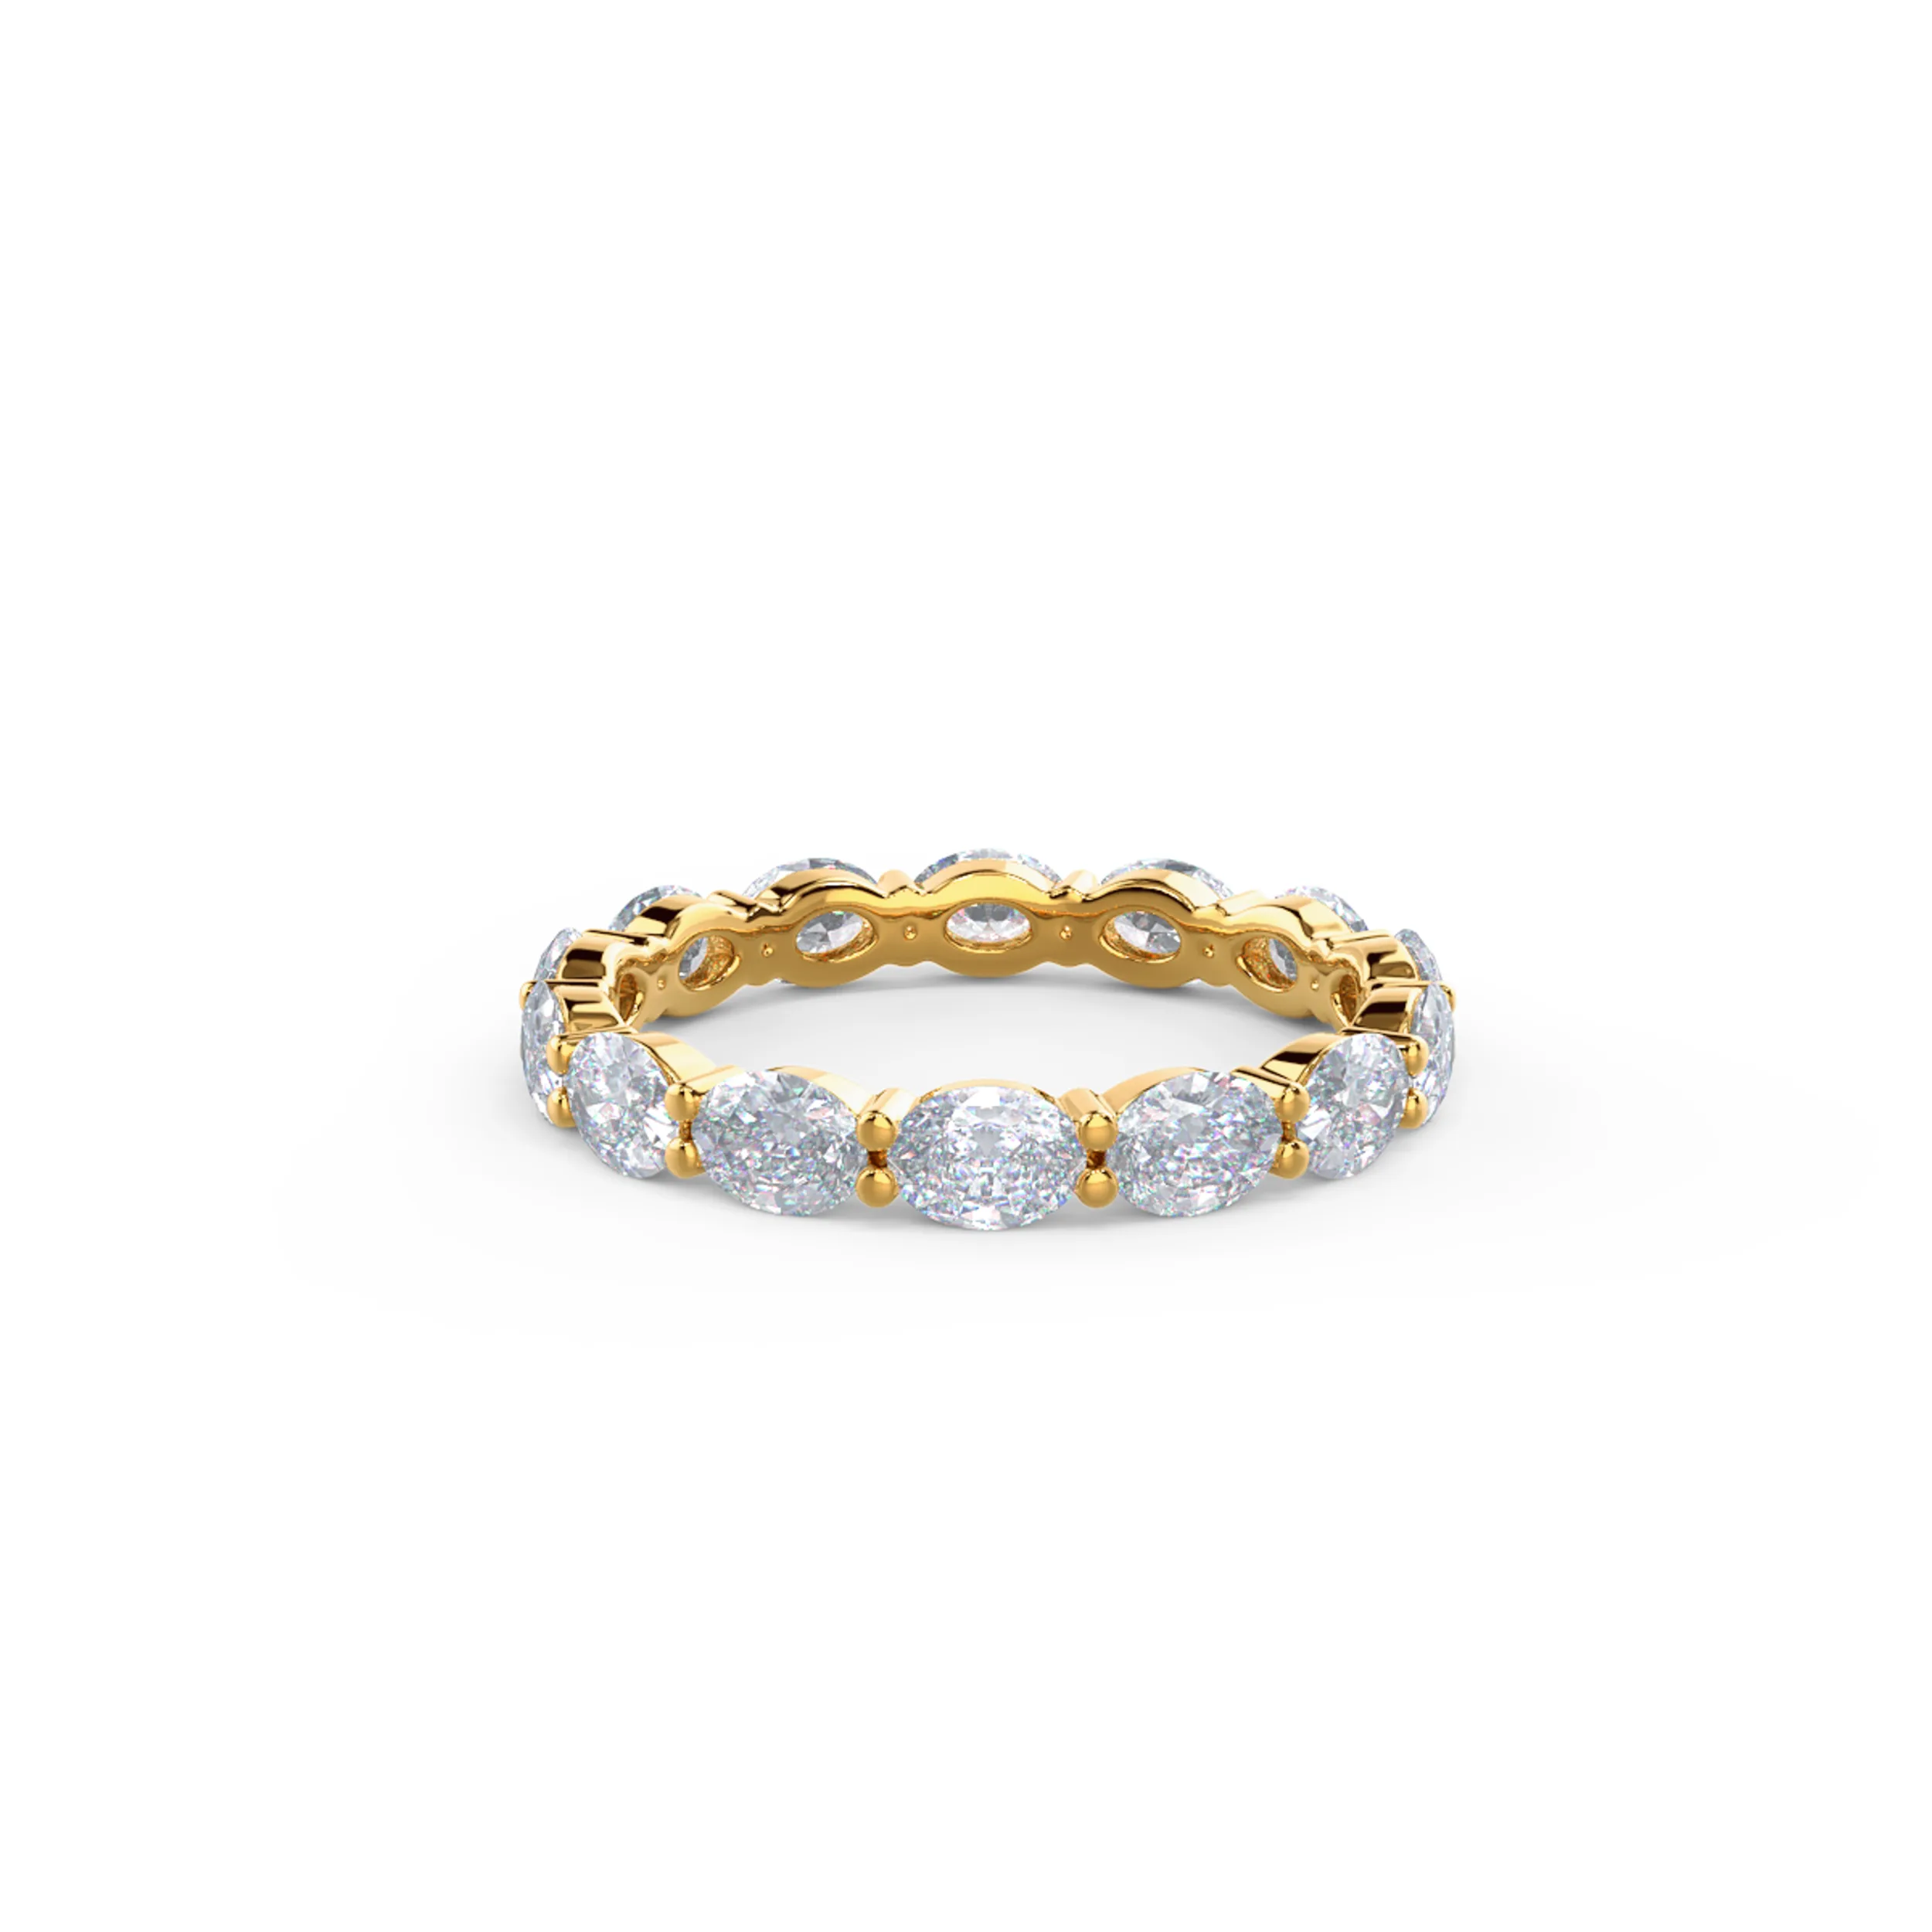 18k Yellow Gold East-West Oval Diamond Eternity Band featuring Exceptional Quality 2.0 ct Lab Diamonds (Main View)